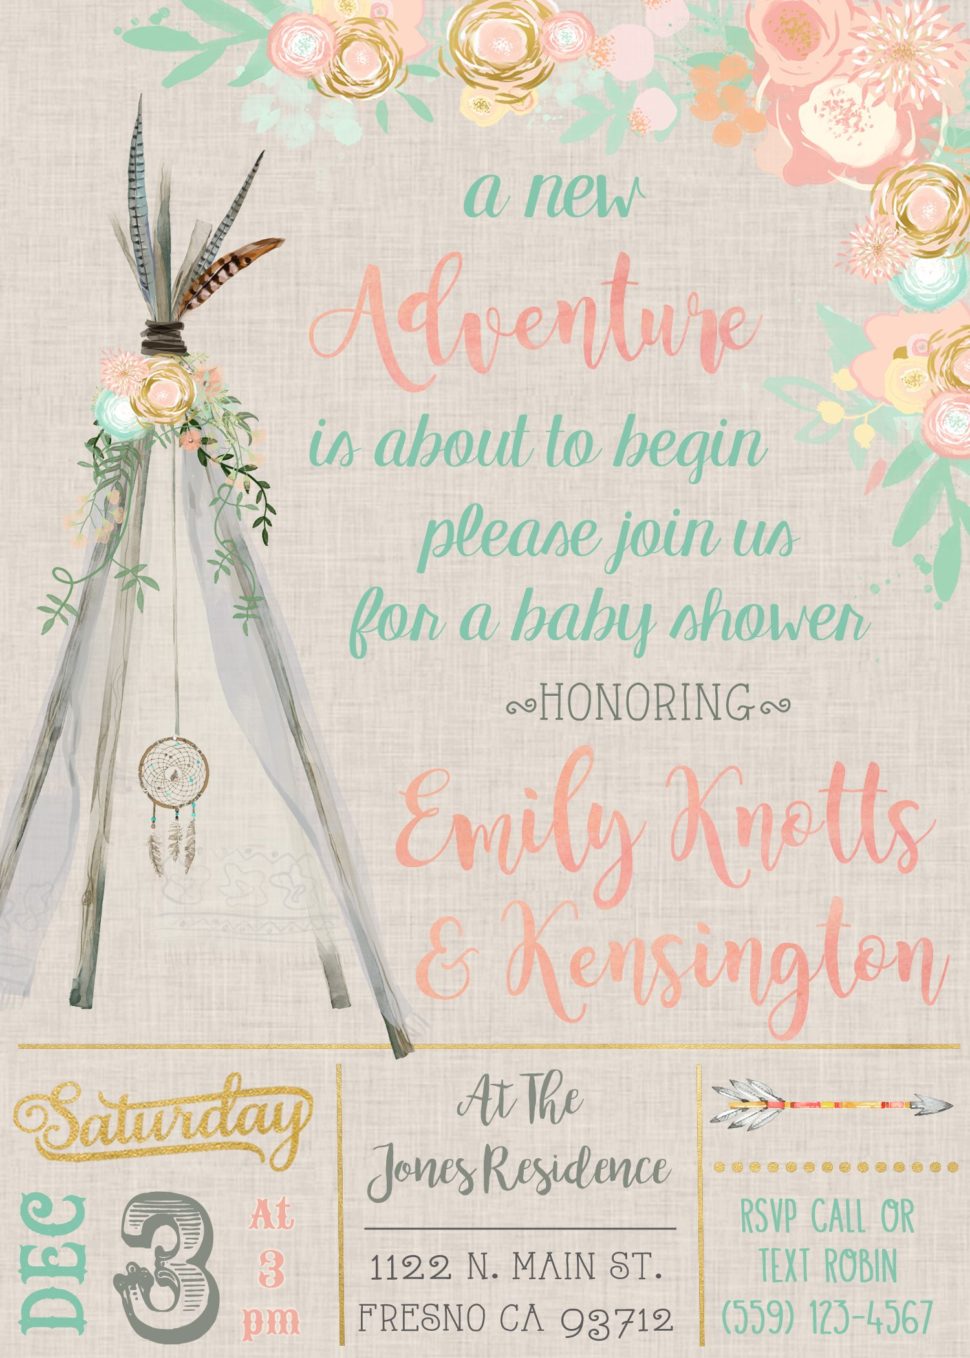 Medium Size of Baby Shower:cheap Invitations Baby Shower Homemade Baby Shower Decorations Baby Shower Centerpiece Ideas For Boys Homemade Baby Shower Centerpieces Baby Girl Themes For Bedroom Baby Shower Centerpiece Ideas For Boys Invitations Oriental Trading Baby Shower